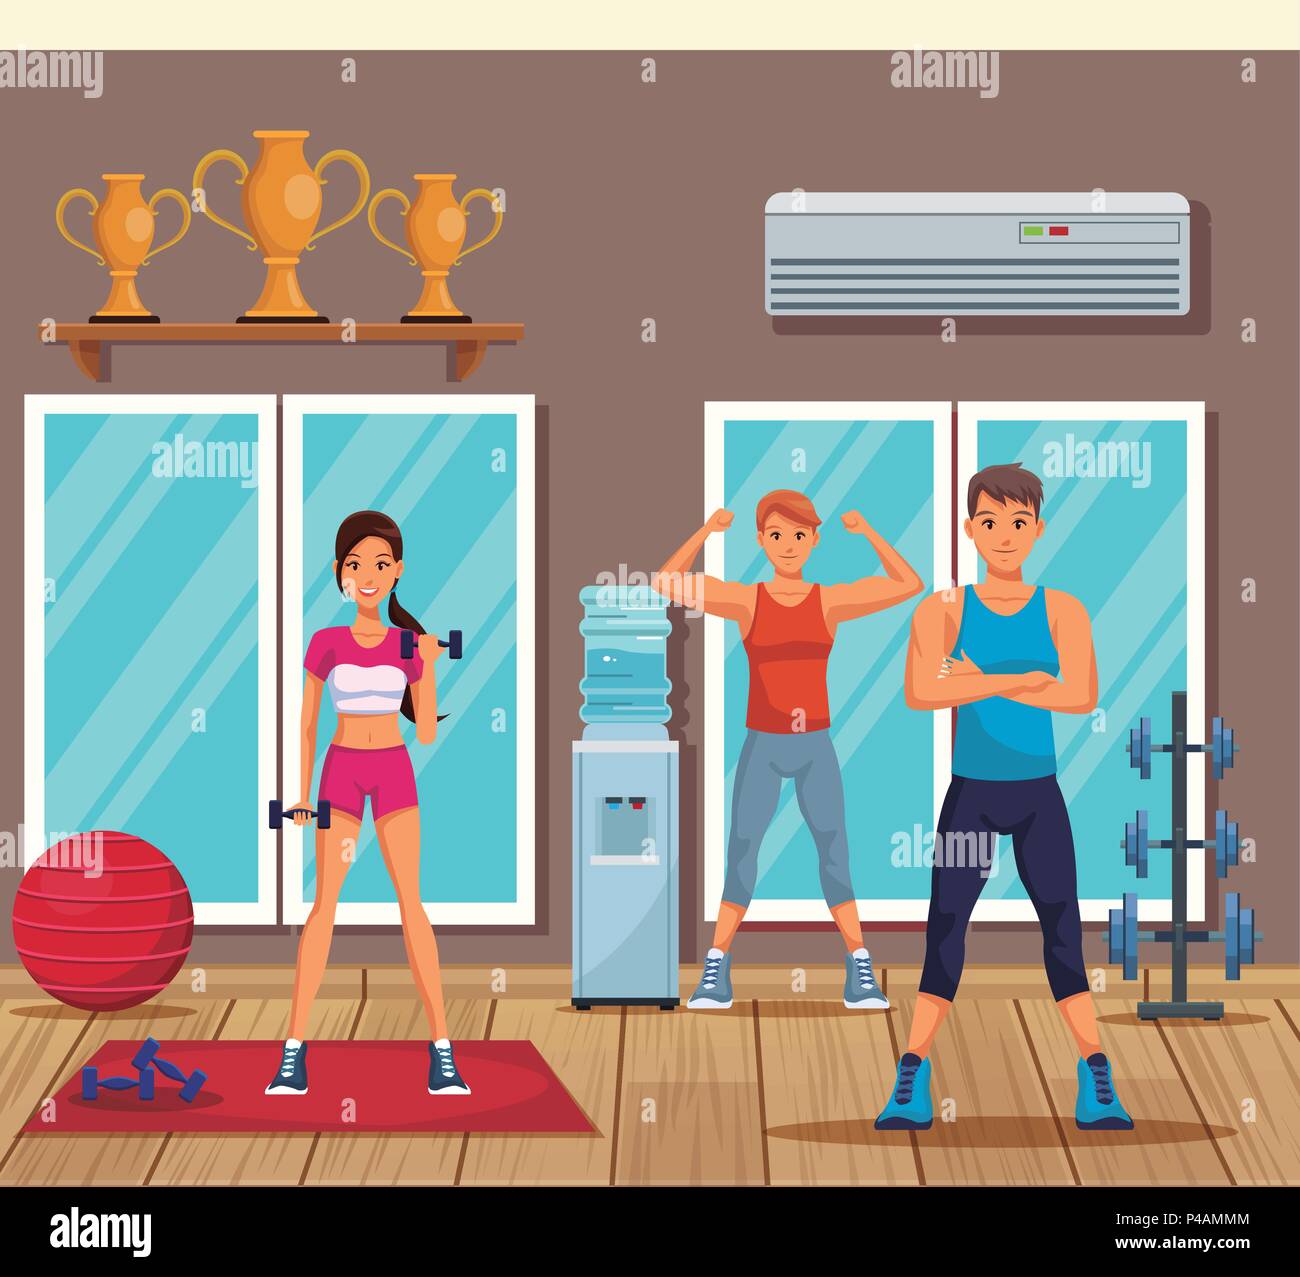 People in the gym Stock Vector